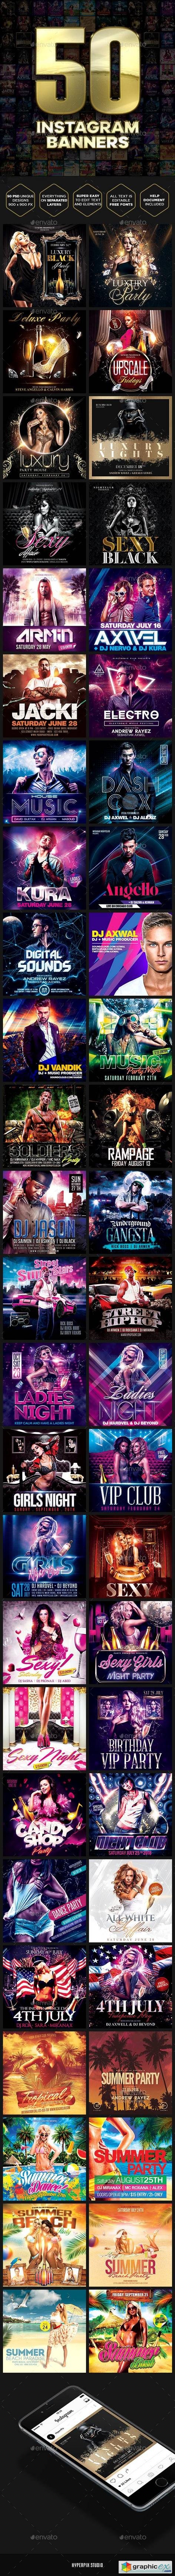 Graphicriver Instagram Banners